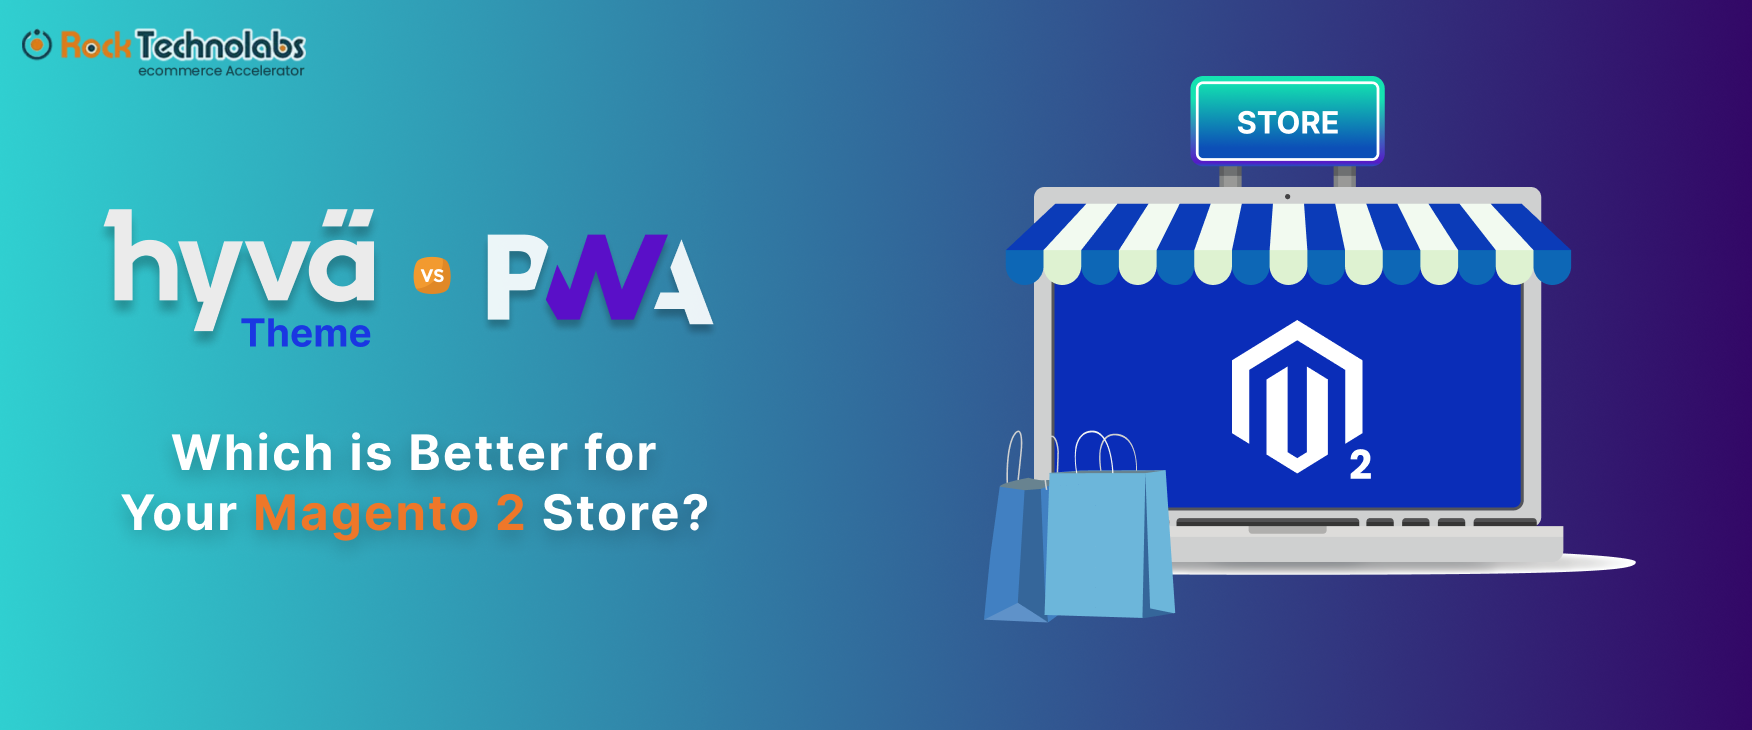 Hyva Theme Vs PWA: Which is Better for Your Magento 2 Store